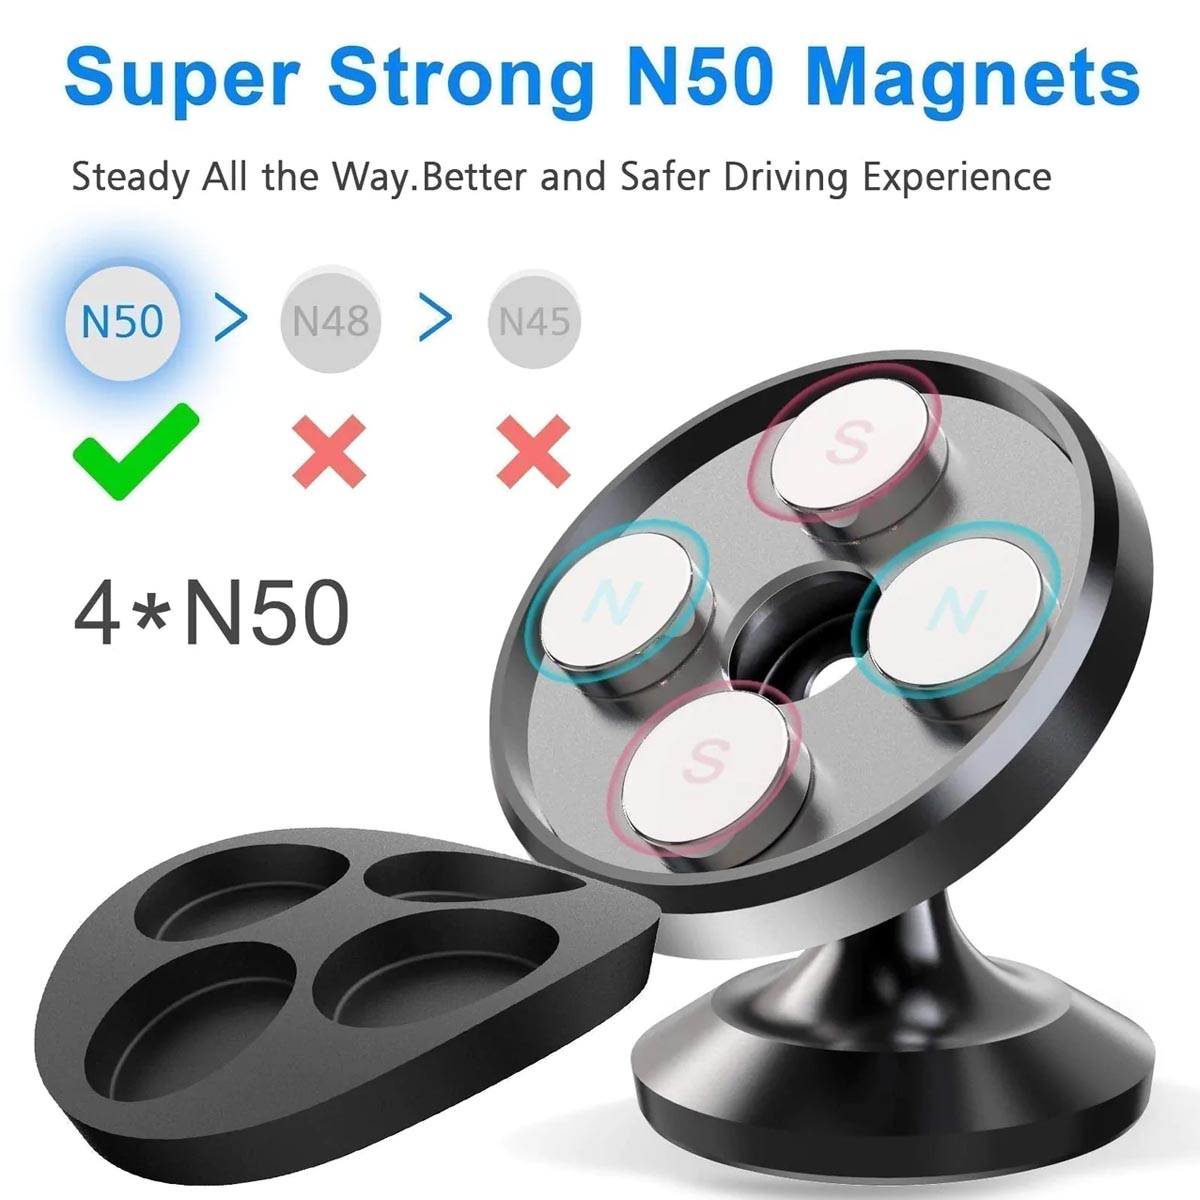 [2 Pack ] Magnetic Phone Mount, Custom For Cars, [ Super Strong Magnet ] [ with 4 Metal Plate ] car Magnetic Phone Holder, [ 360° Rotation ] Universal Dashboard car Mount Fits All Cell Phones, Car Accessories LI13982